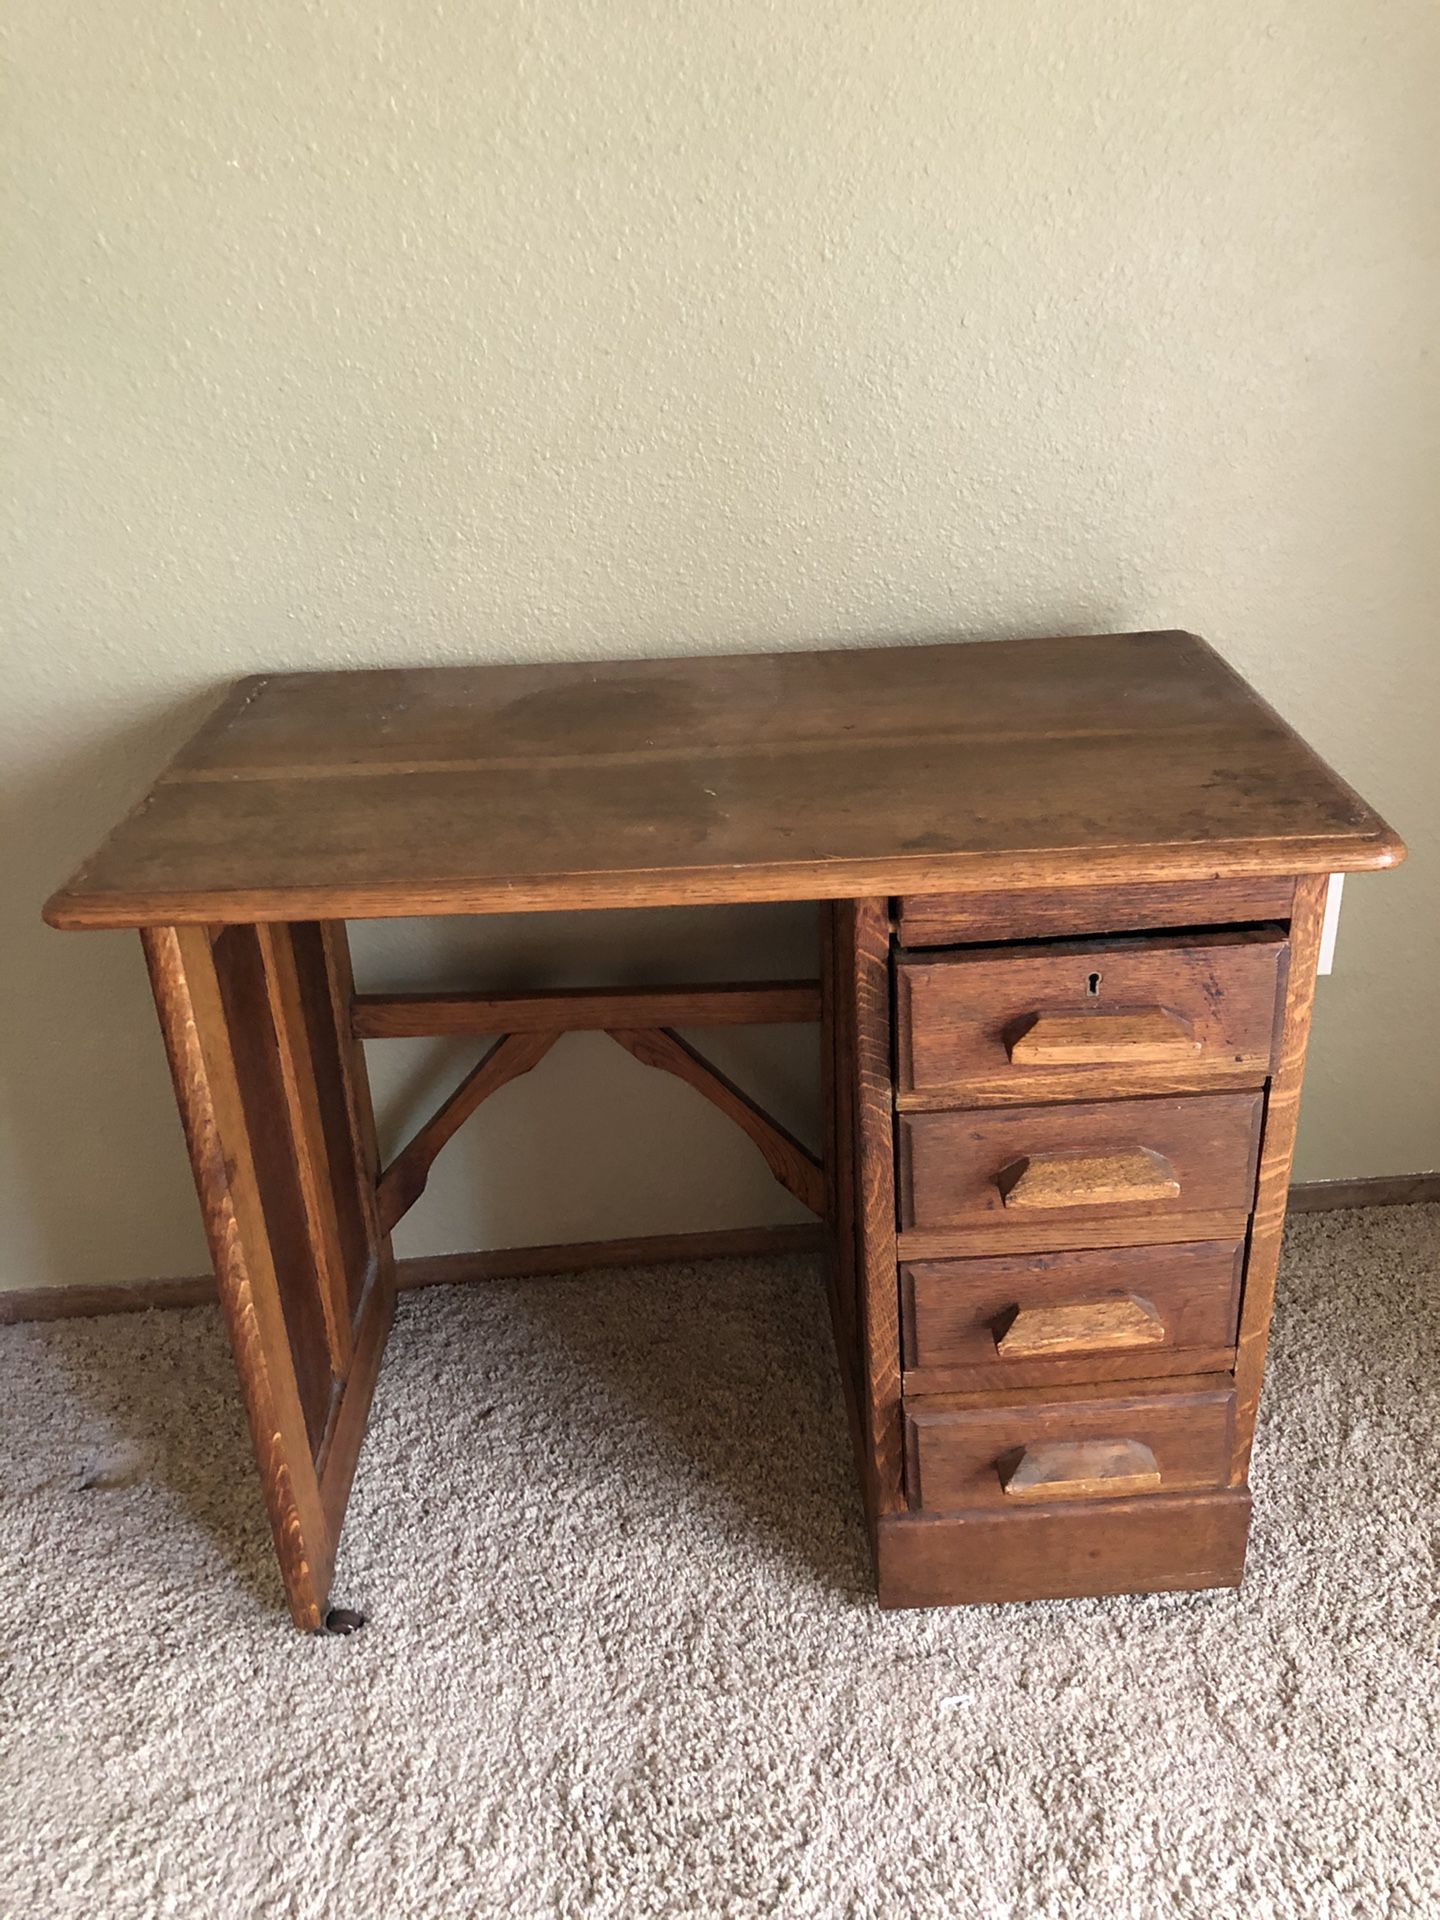 Antique student desk or nightstand or table